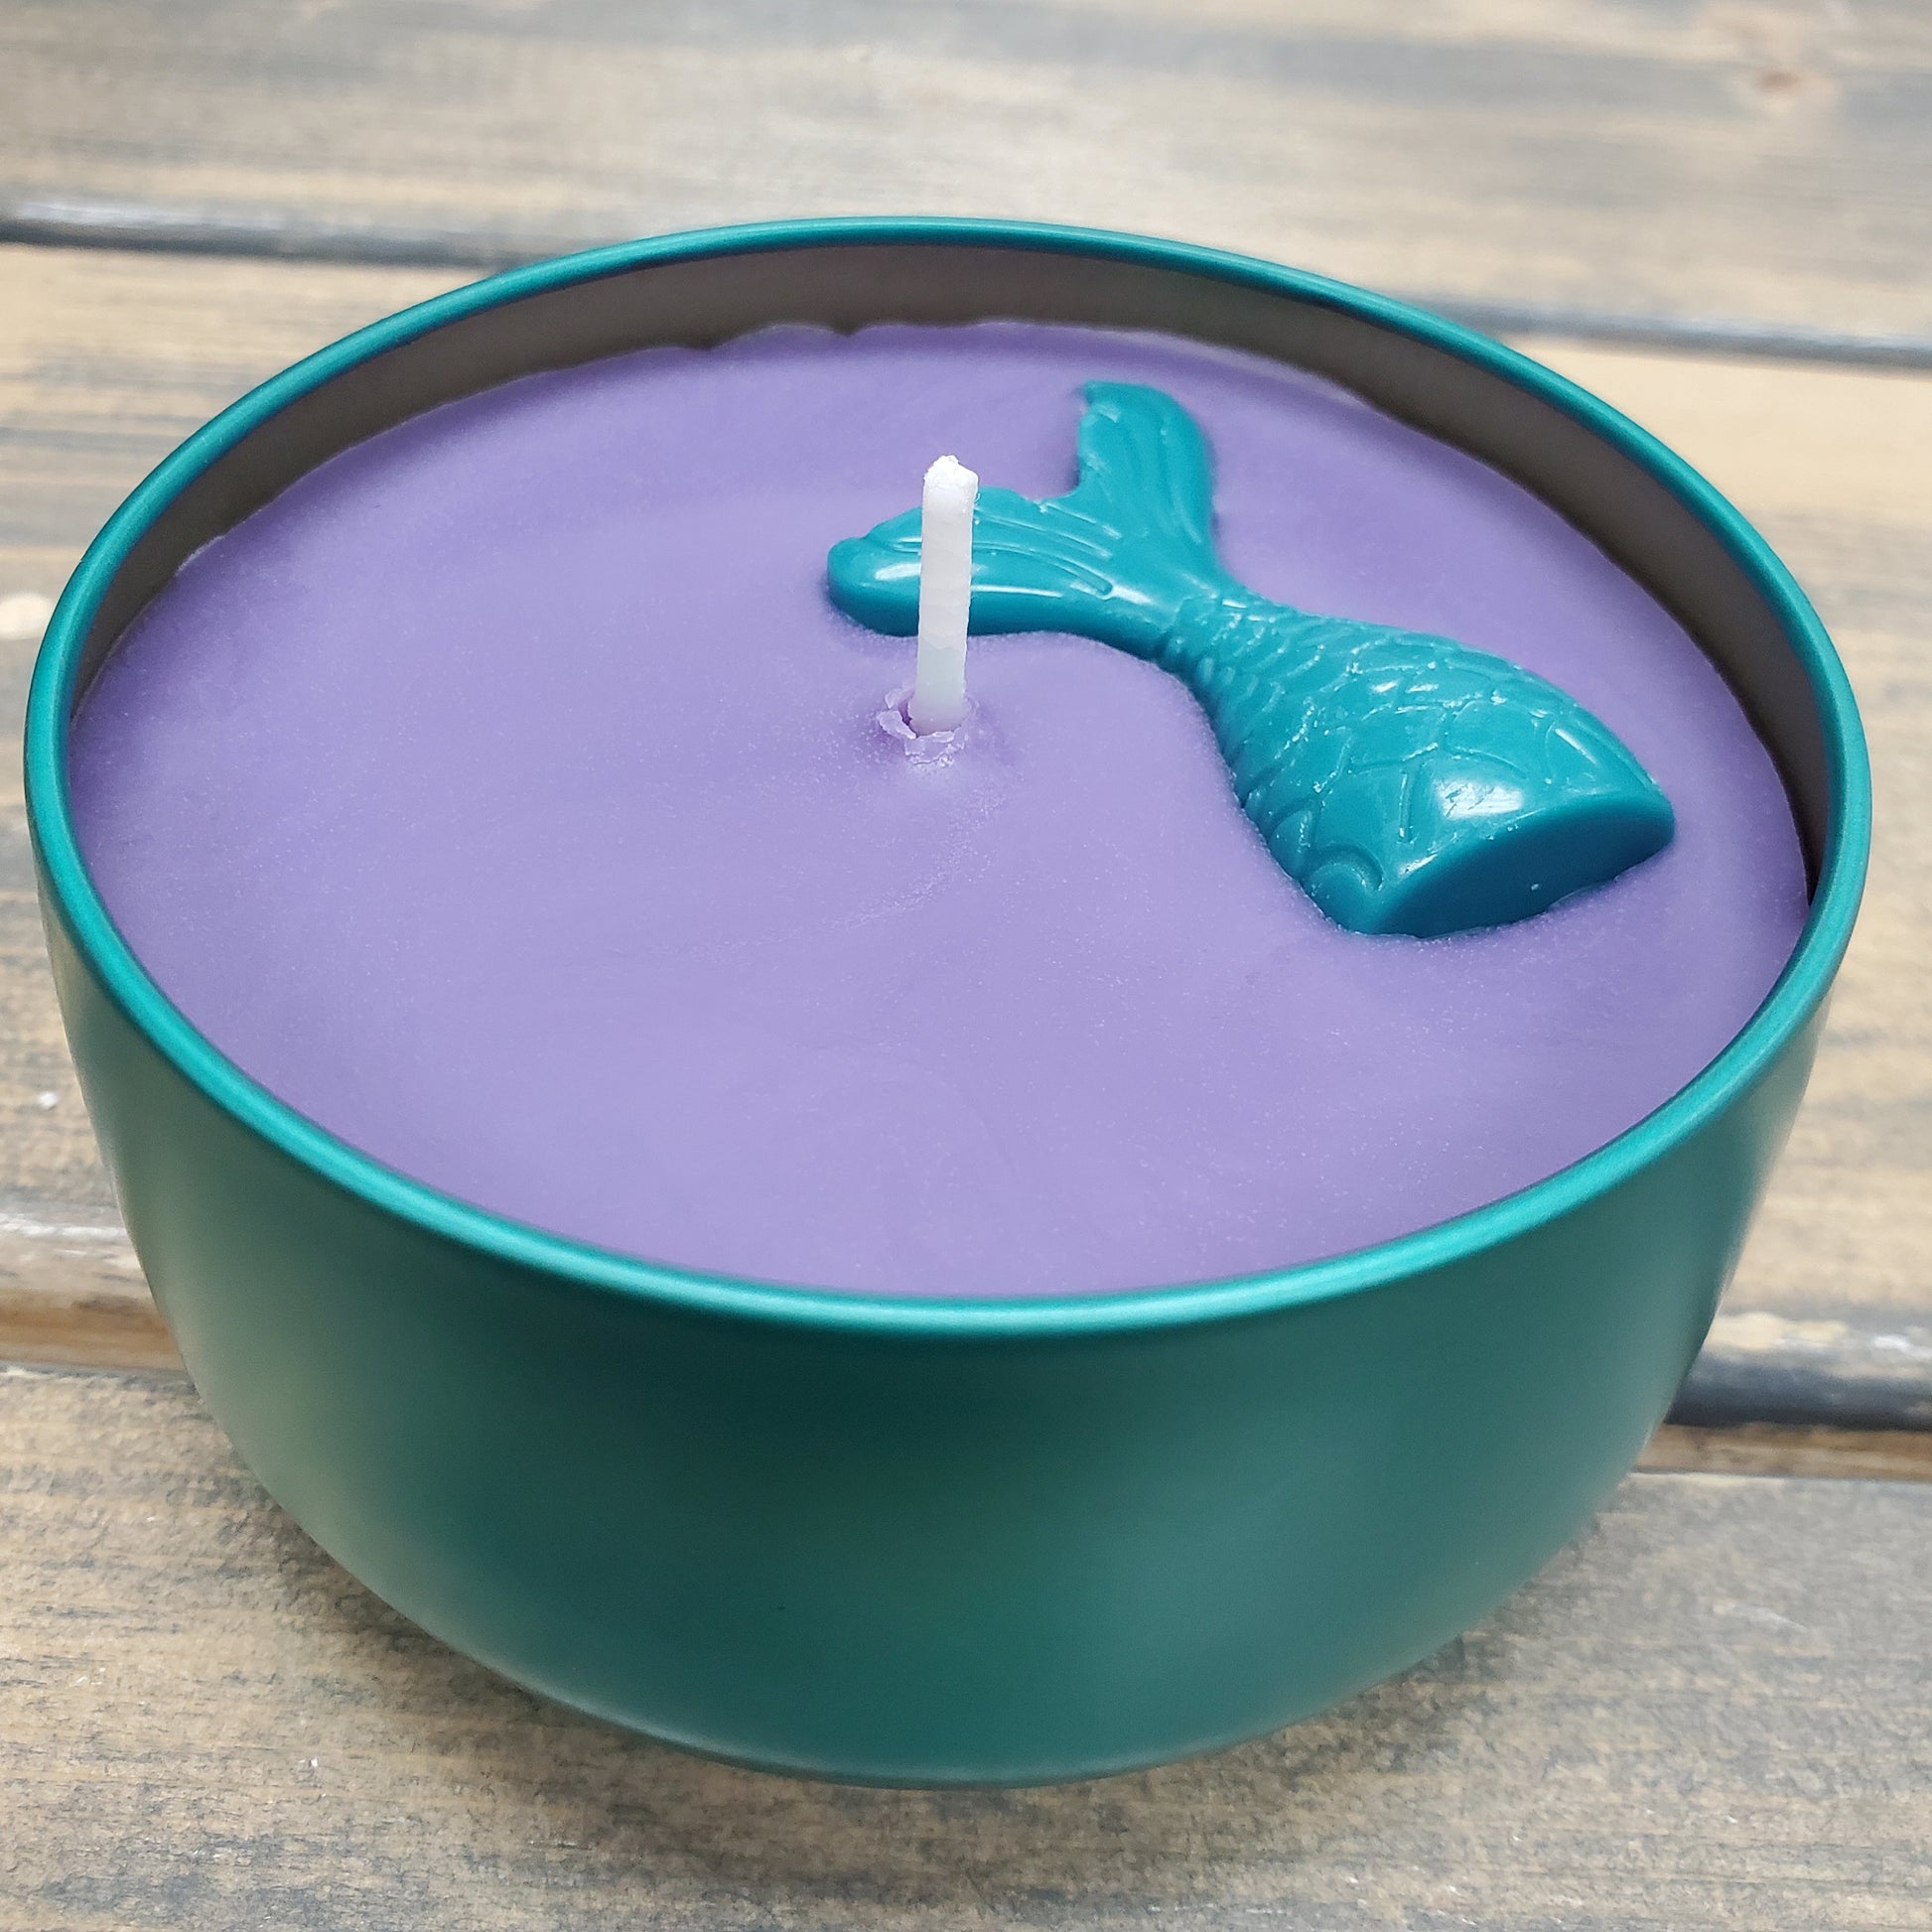 under the sea candle - the salty hive